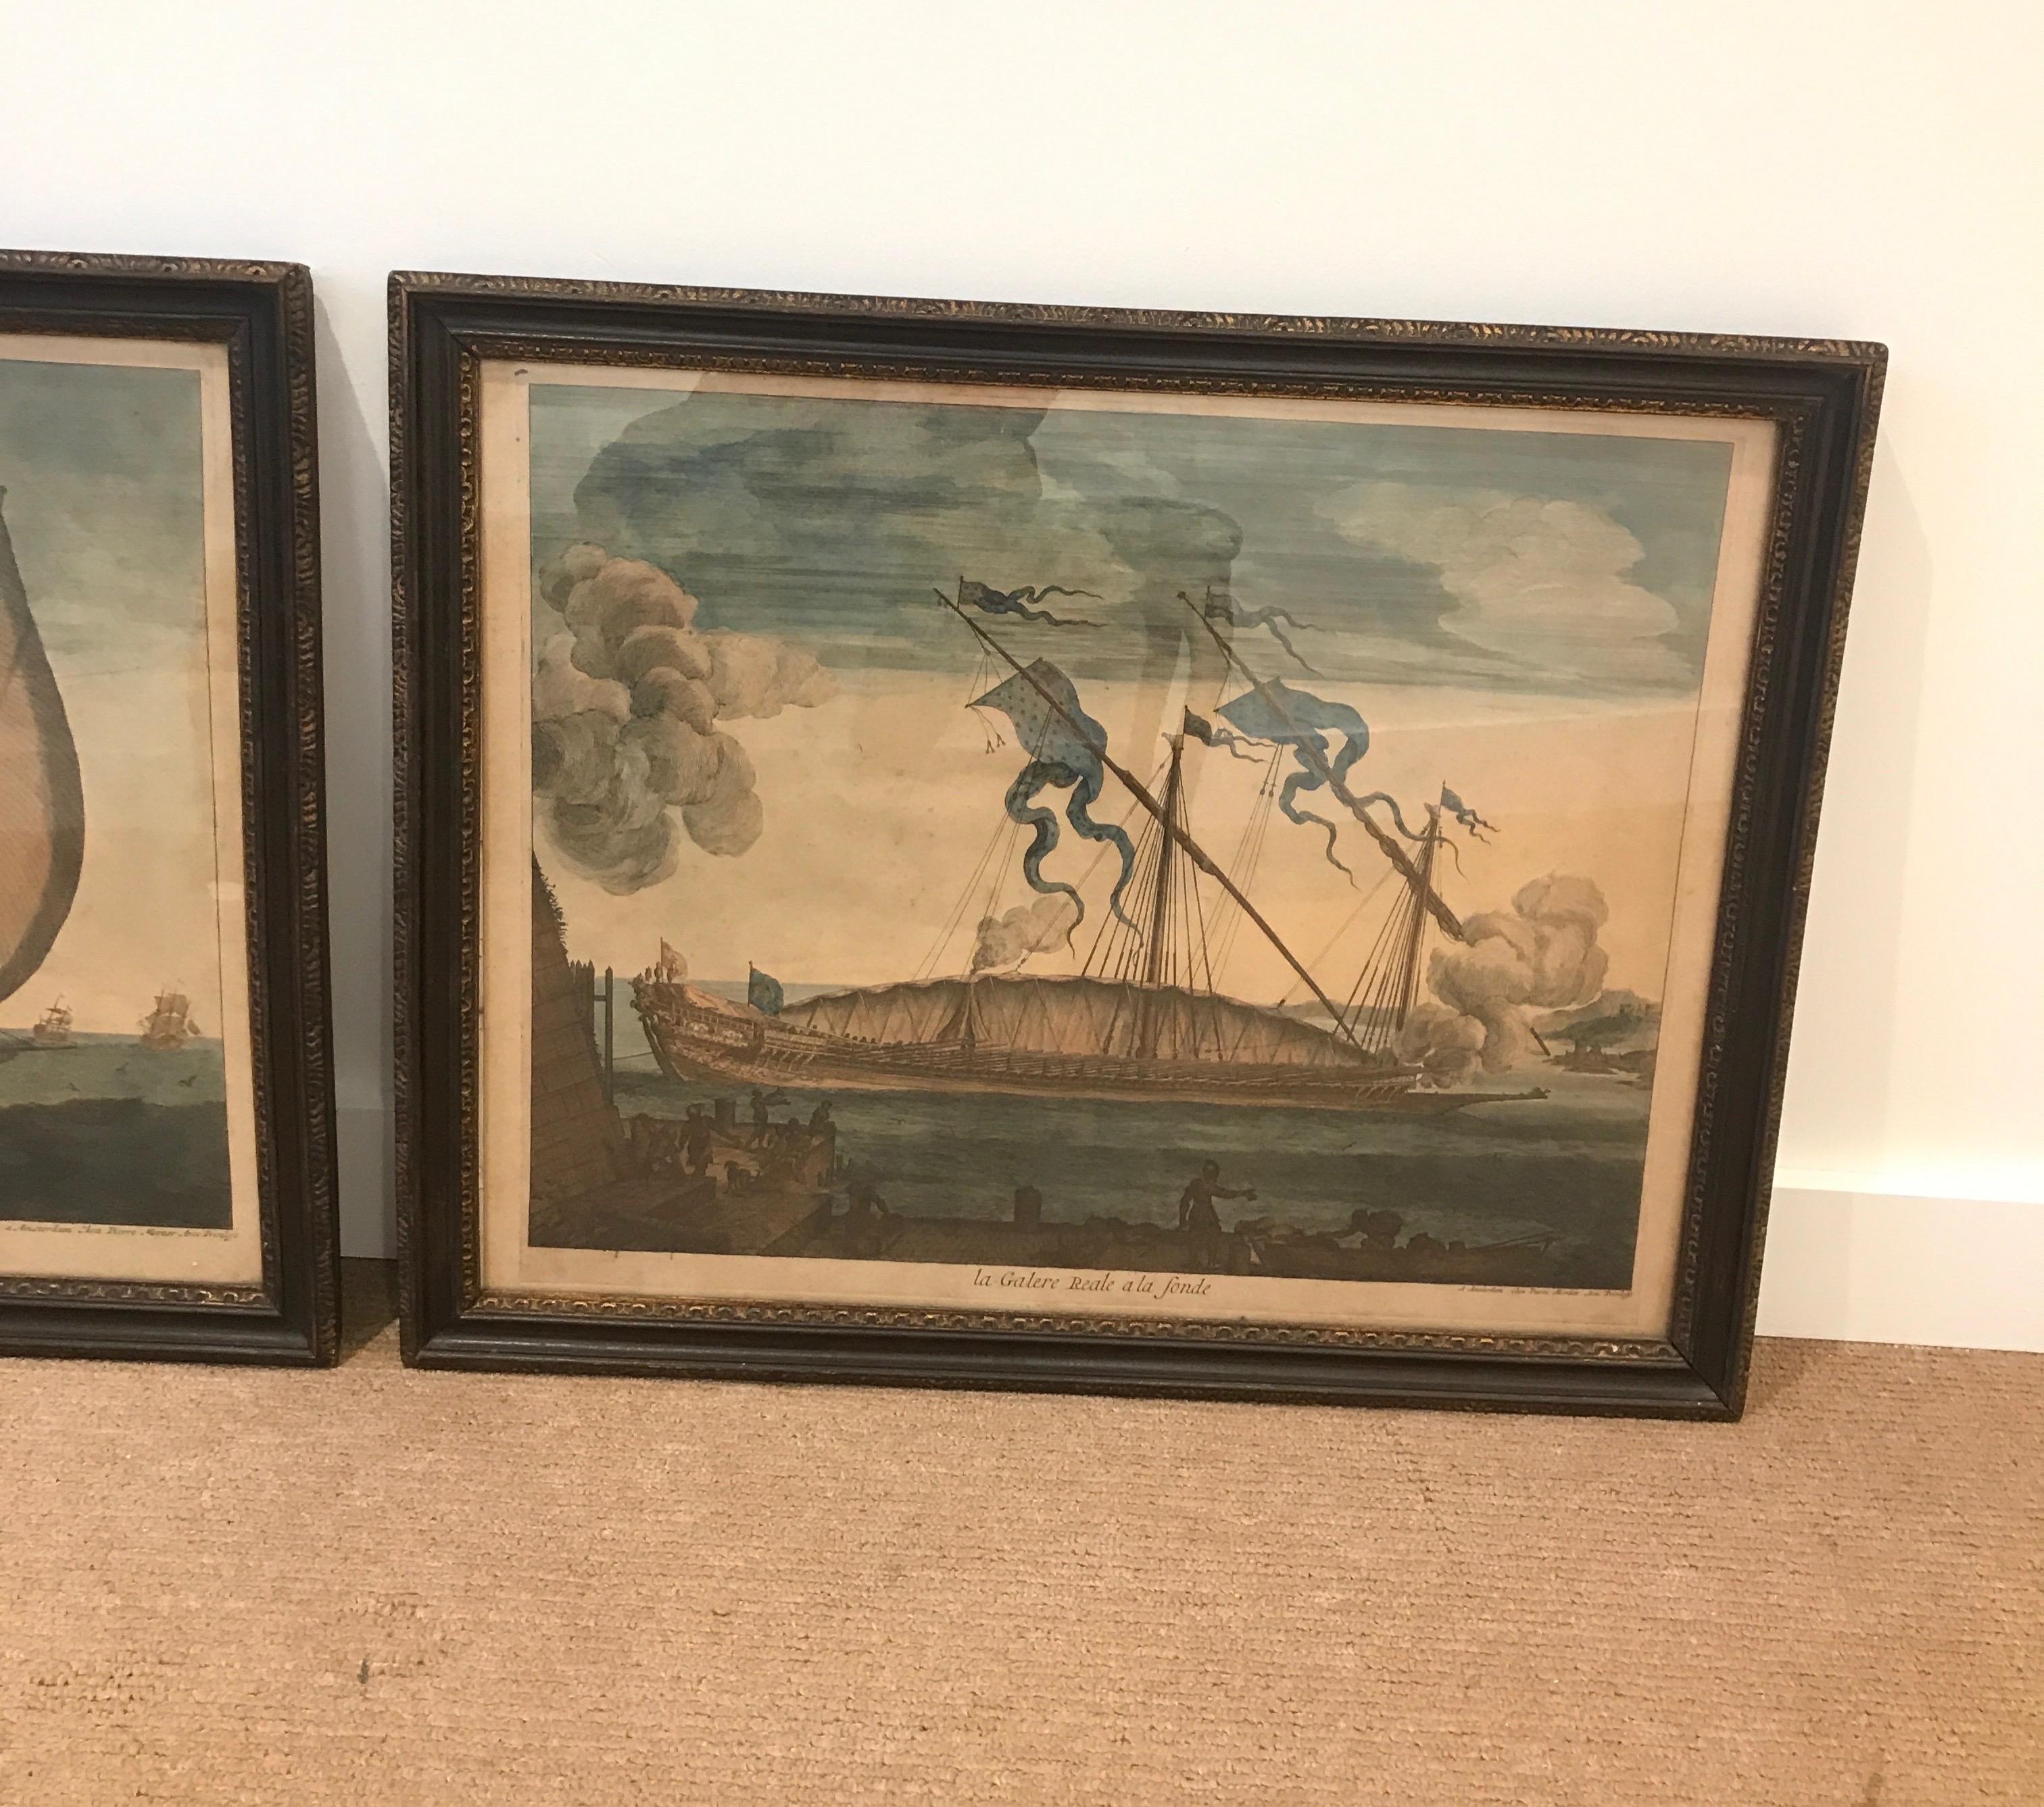 A pair of Dutch late 1600s hand colored engraving prints by Pierre Mortier, Amsterdam. Overall very good condition with some visible foxing discoloration and folds. the frames in a black painted wood from the late 19th century
Pieter Mortier